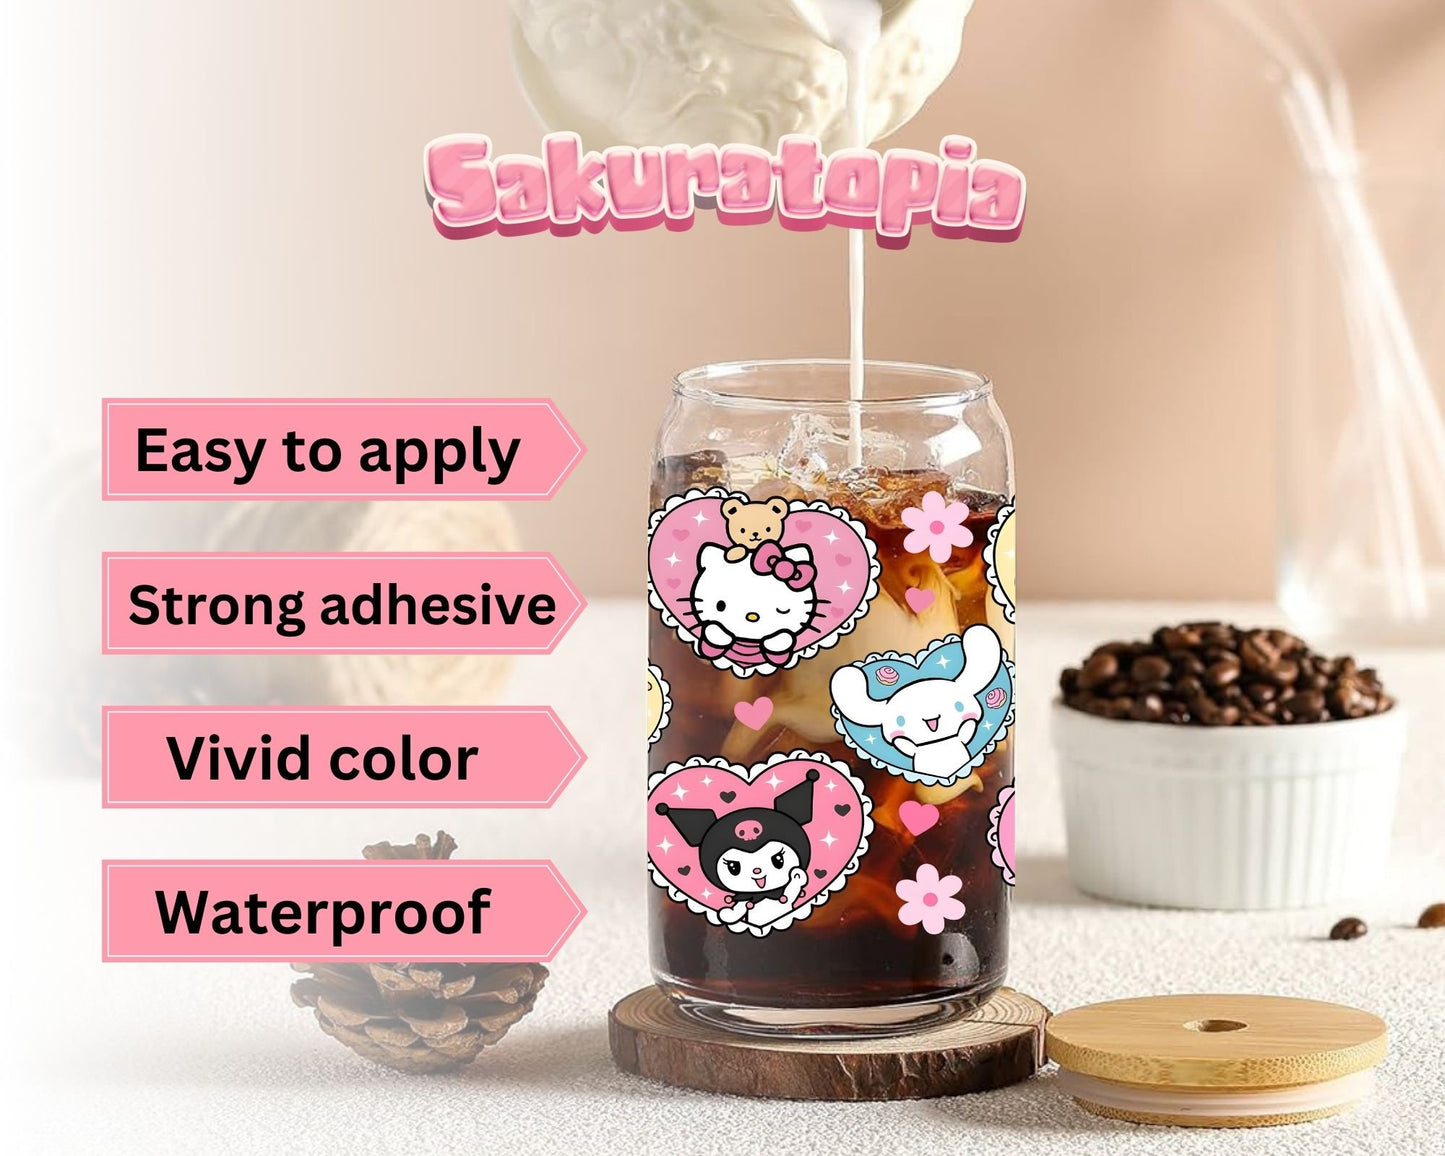 UVDTF Sanrio Anime Cup Wrap, Ready to Use Glass Cup UVDTF transfers for Glass Can | Ready to Apply UVDTF wraps for Libbey Glass